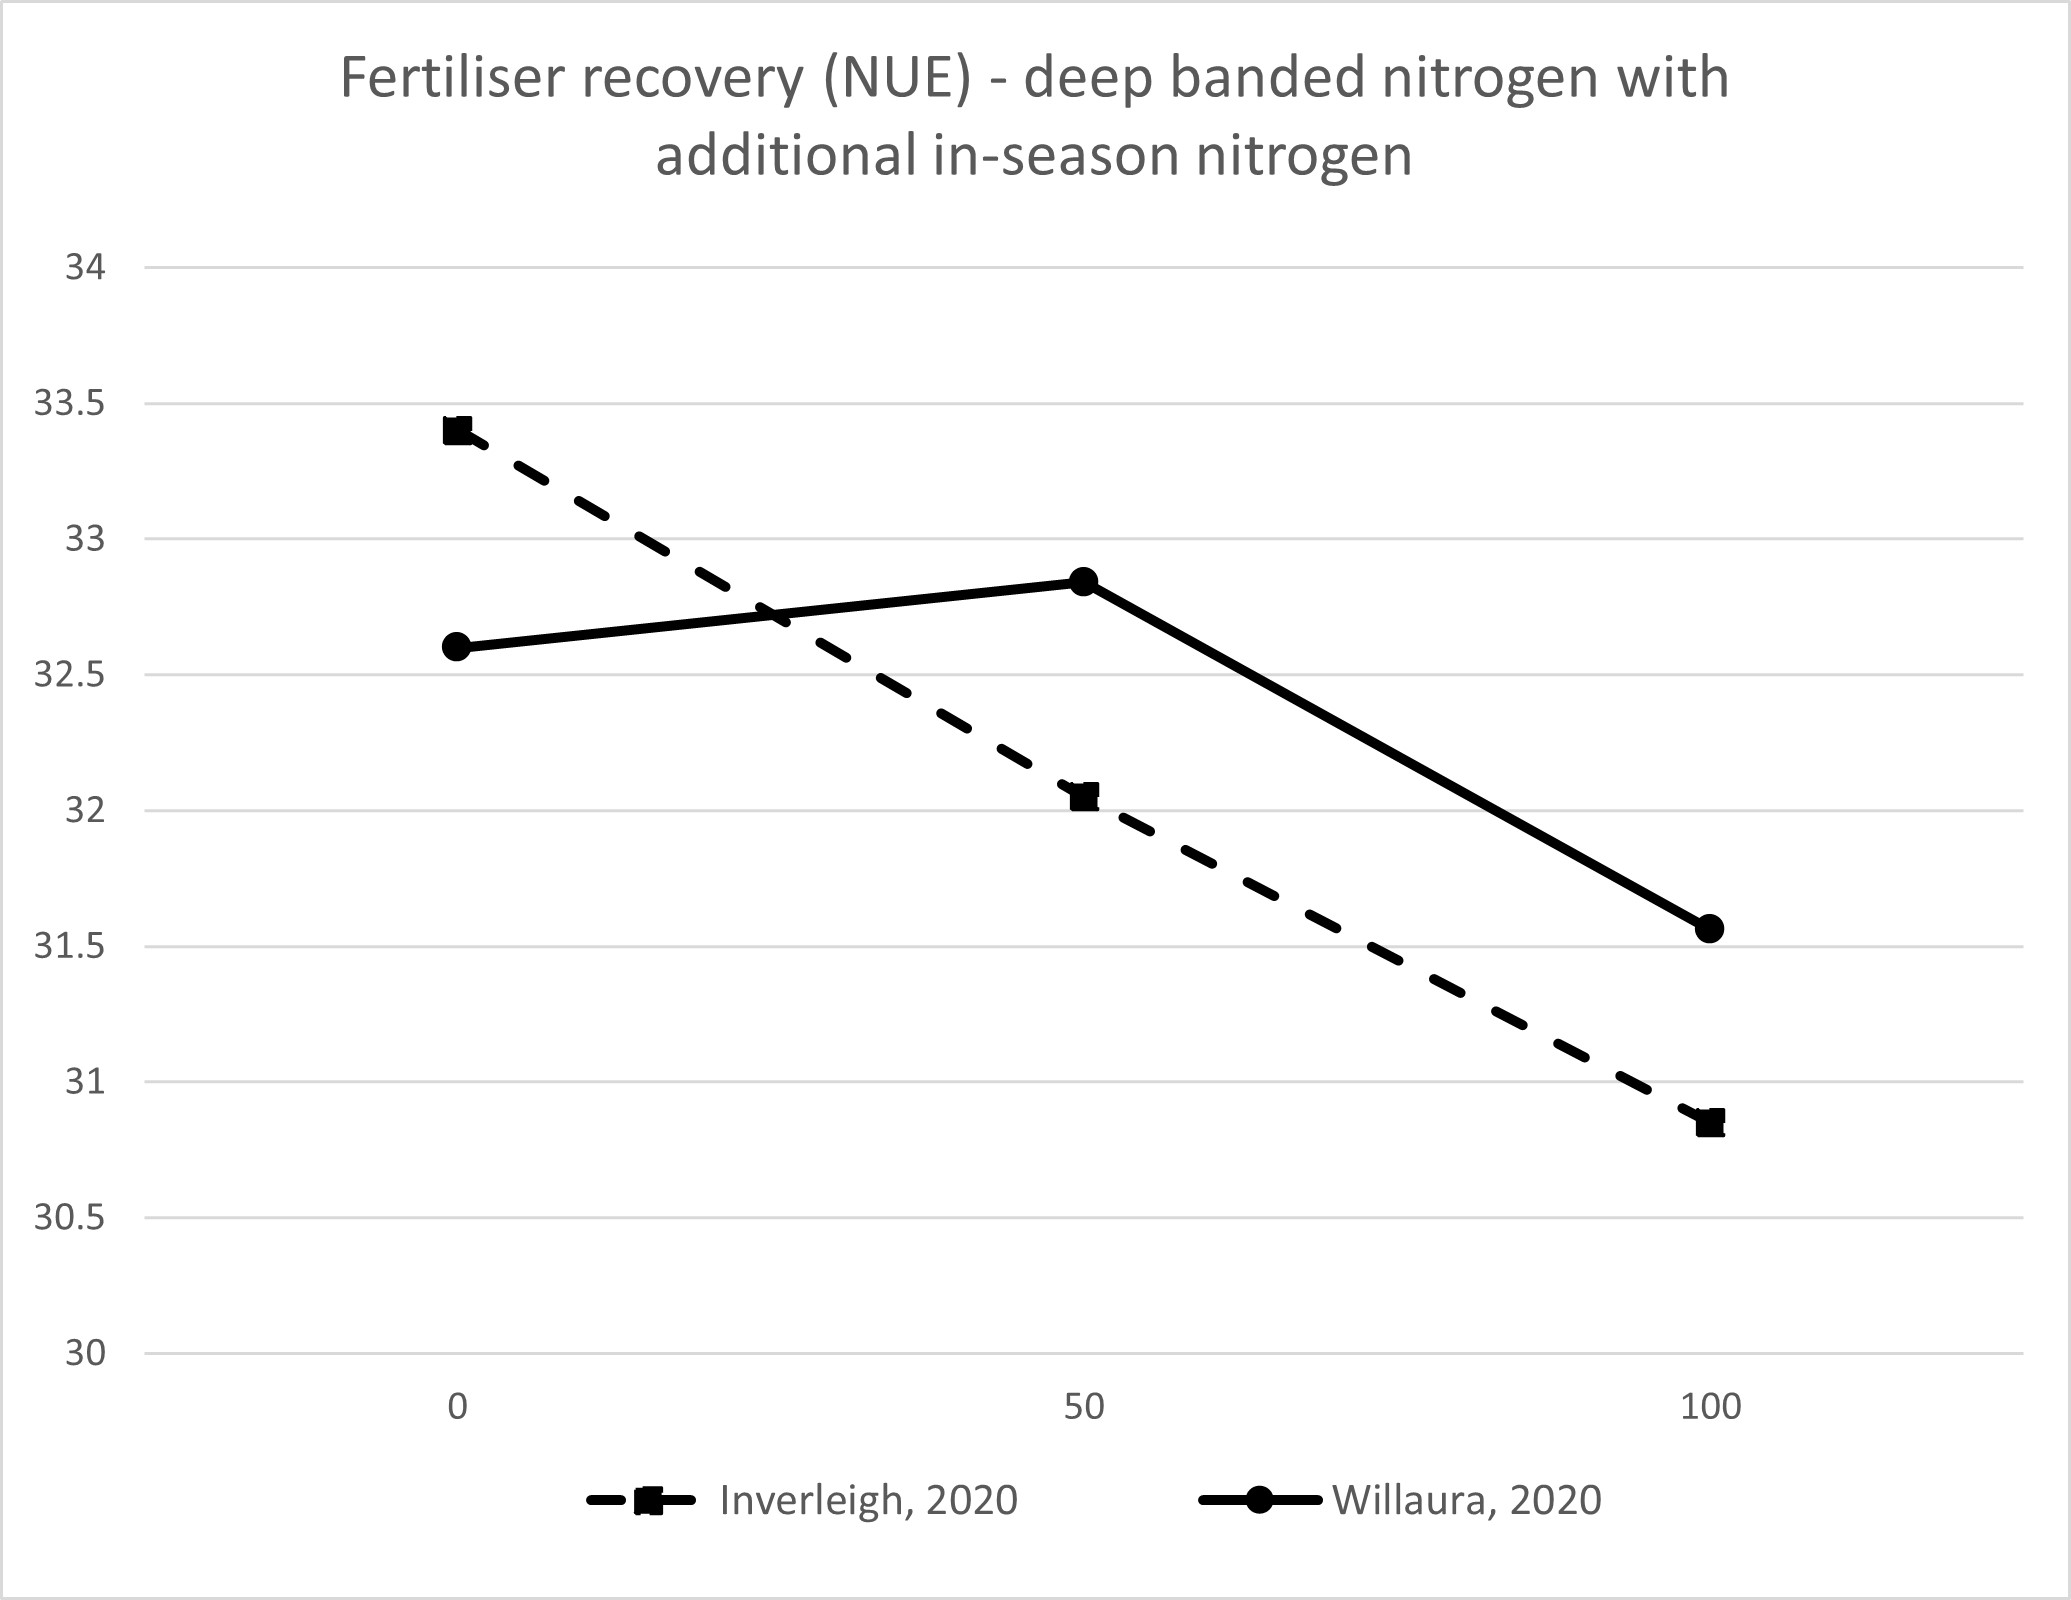 Figure 3. Fertiliser recovering, indicating nitrogen use efficiency, where deep banded treatments were combined with a top-dressing application in-season in 2020. 